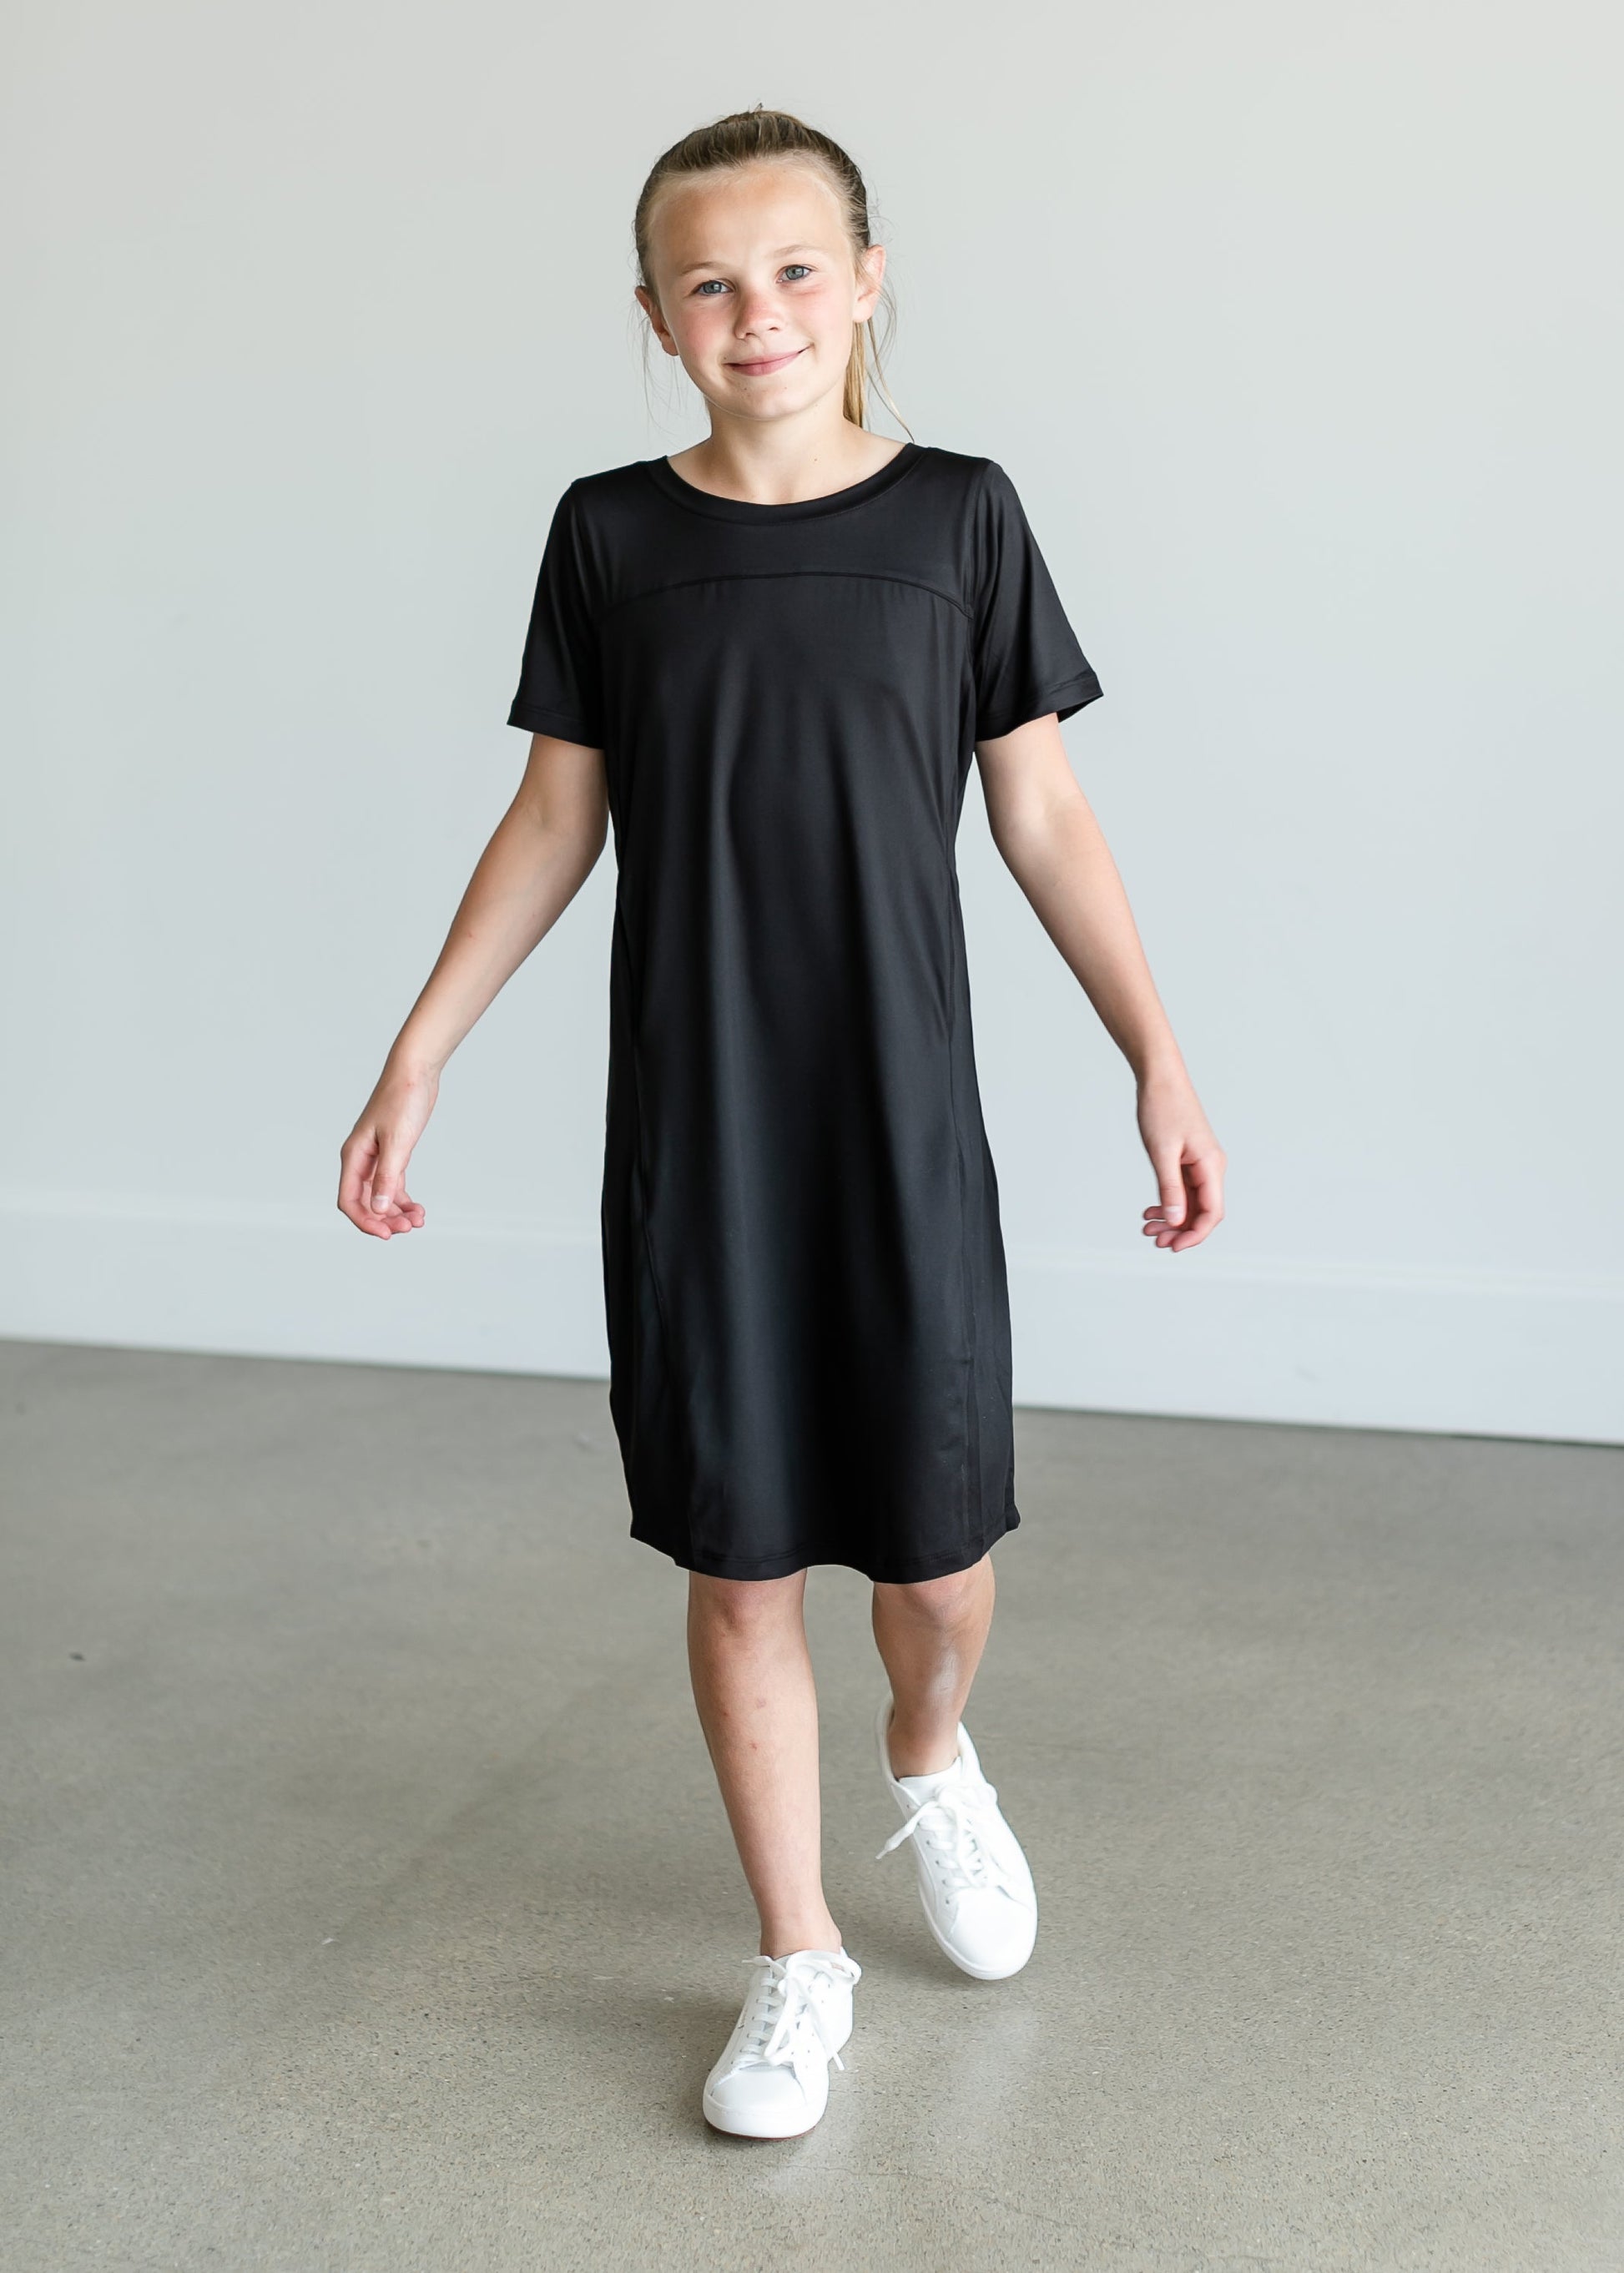 A girl's sized midi sports dress made from quick dry fabric. Comes in black or mauve.